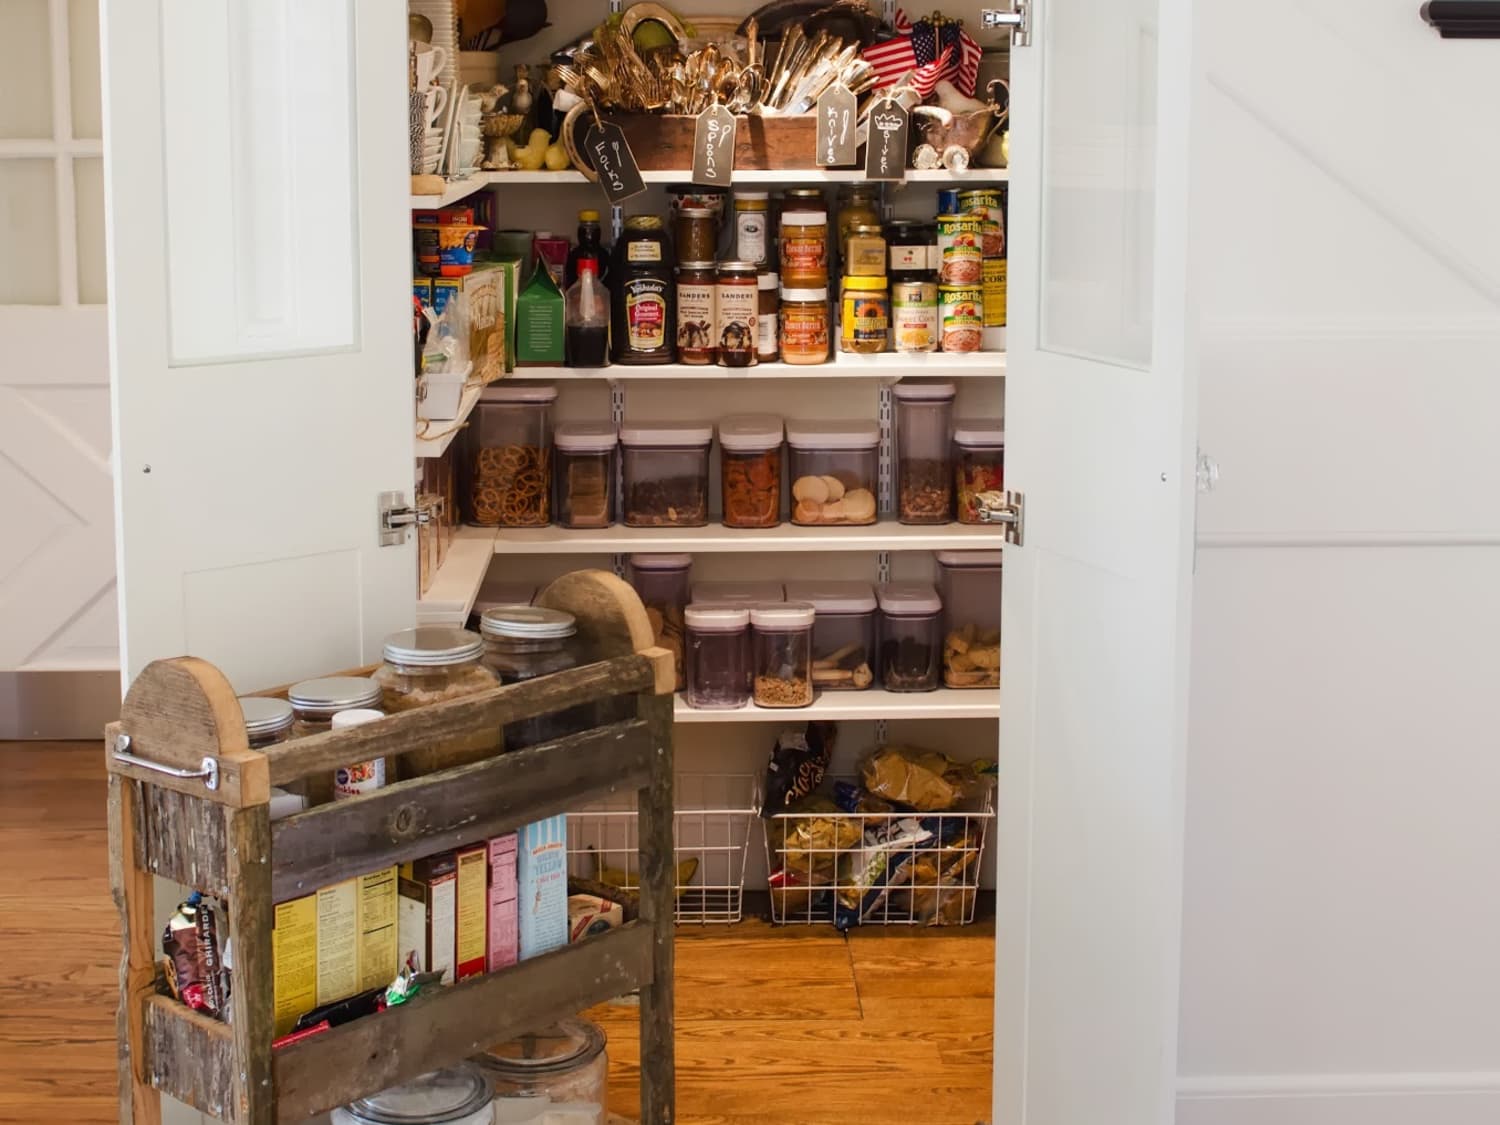 Keep Tidier And More Organized With These Fresh Kitchen Shelves Ideas -  Décor Aid